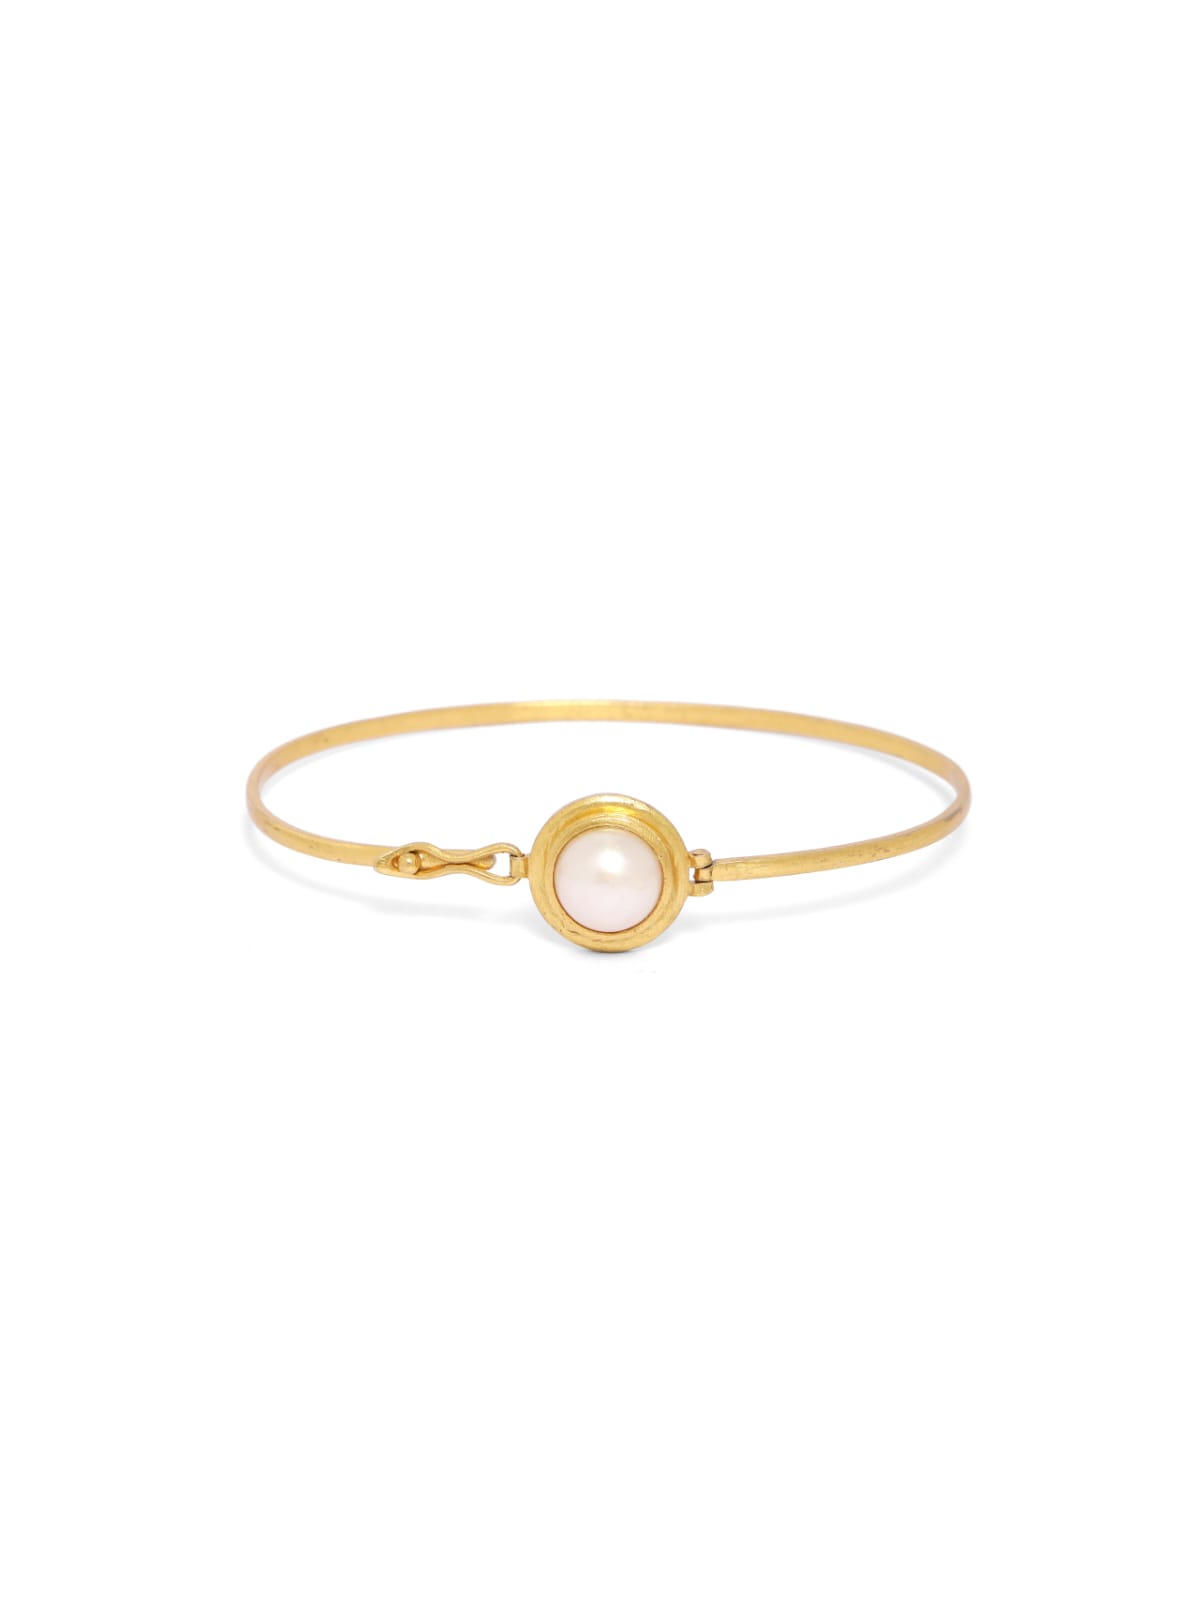 Pearl set stacking bracelet in sterling Silver with micron Gold plating.